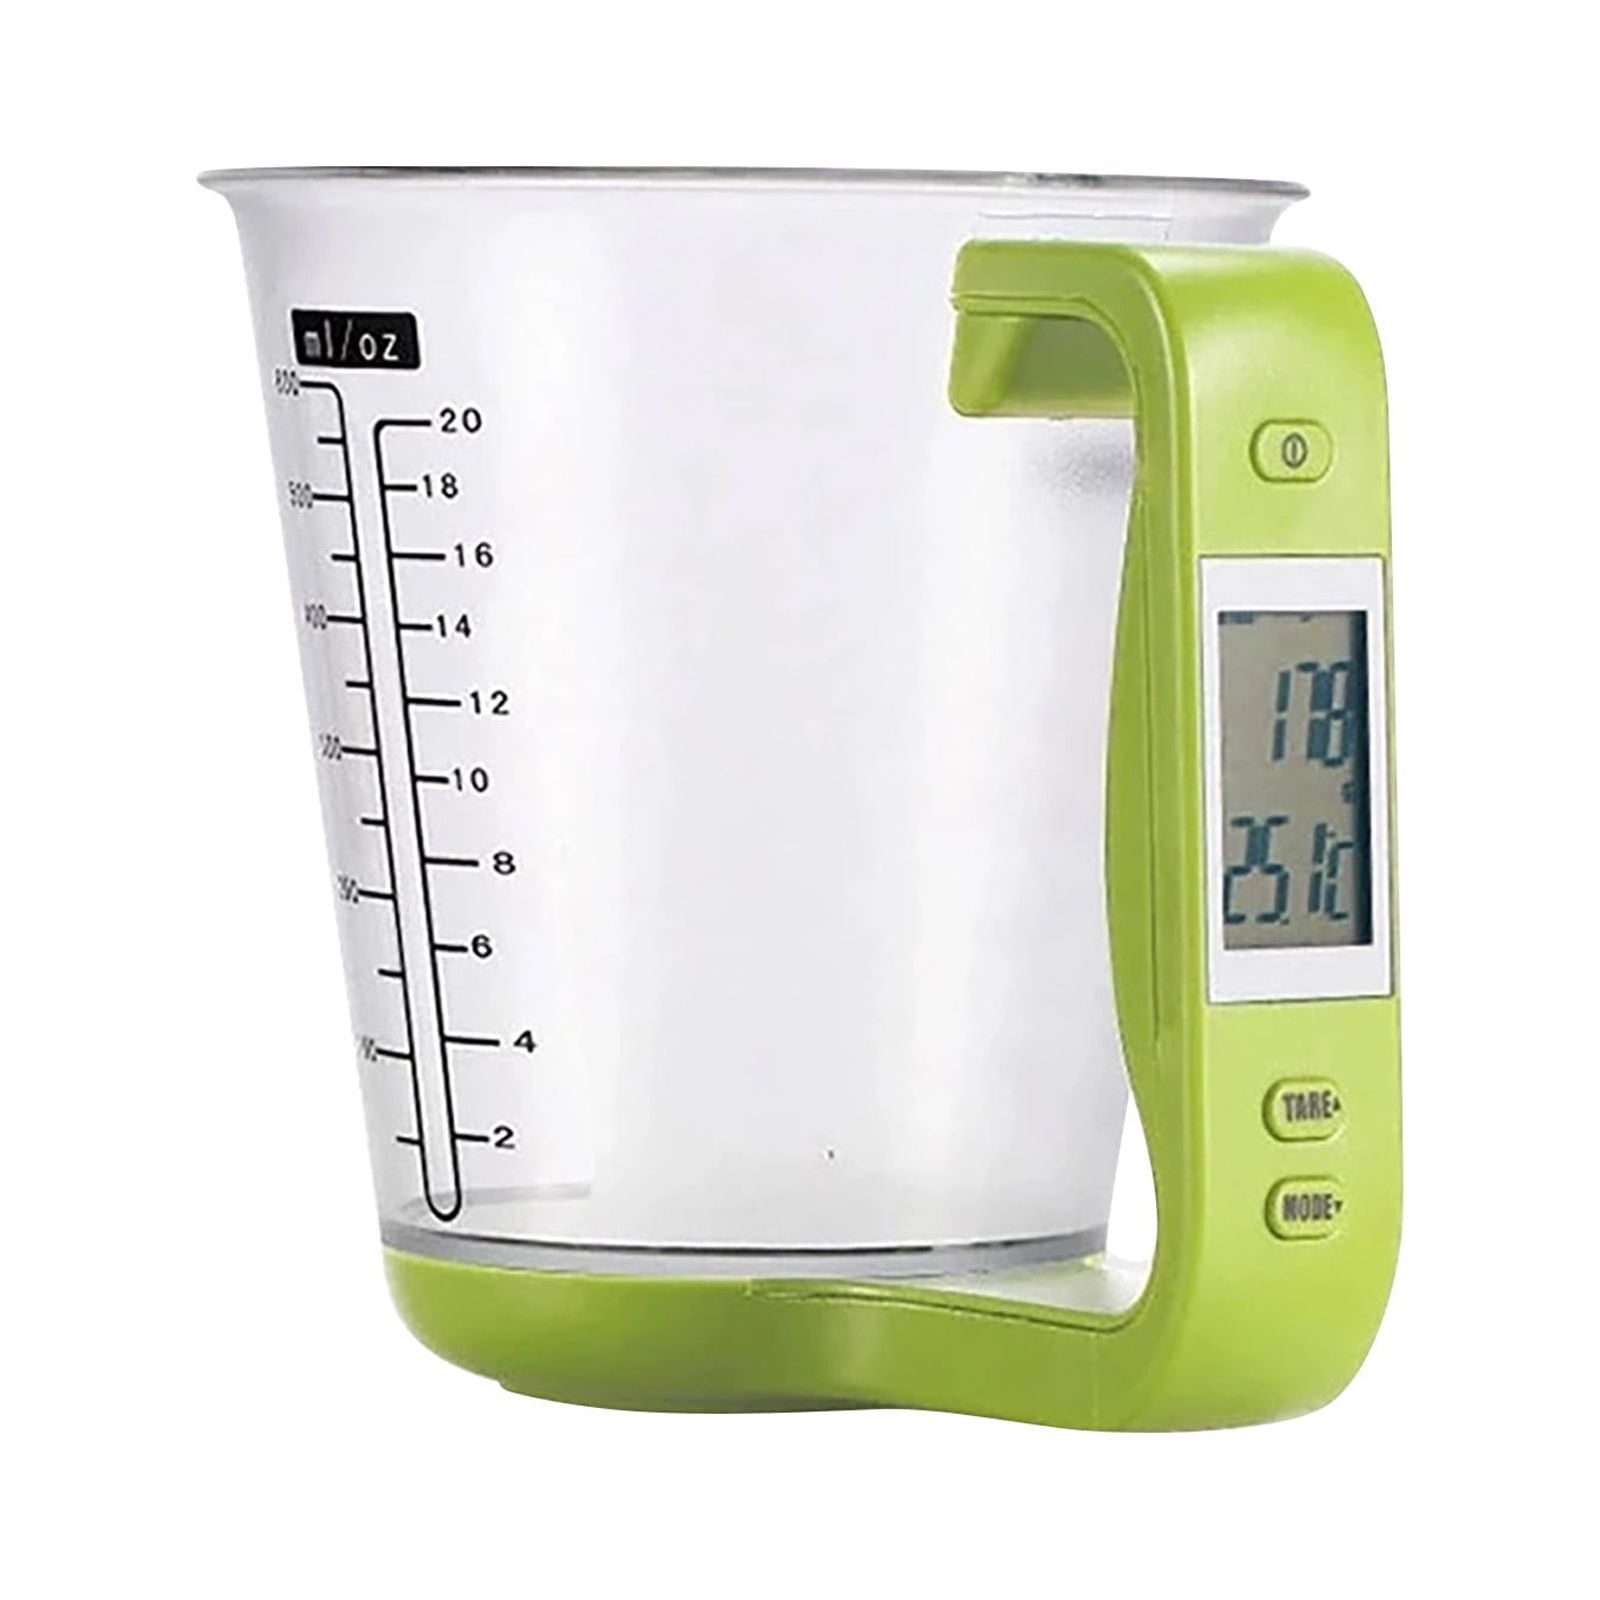 SmartHeart Digital Kitchen Measuring Cup Scale | Accurate Measurements with  Cup Or Scale Platform | Unit Conversion Grams, Lbs/Oz, Fluid Oz, Cups